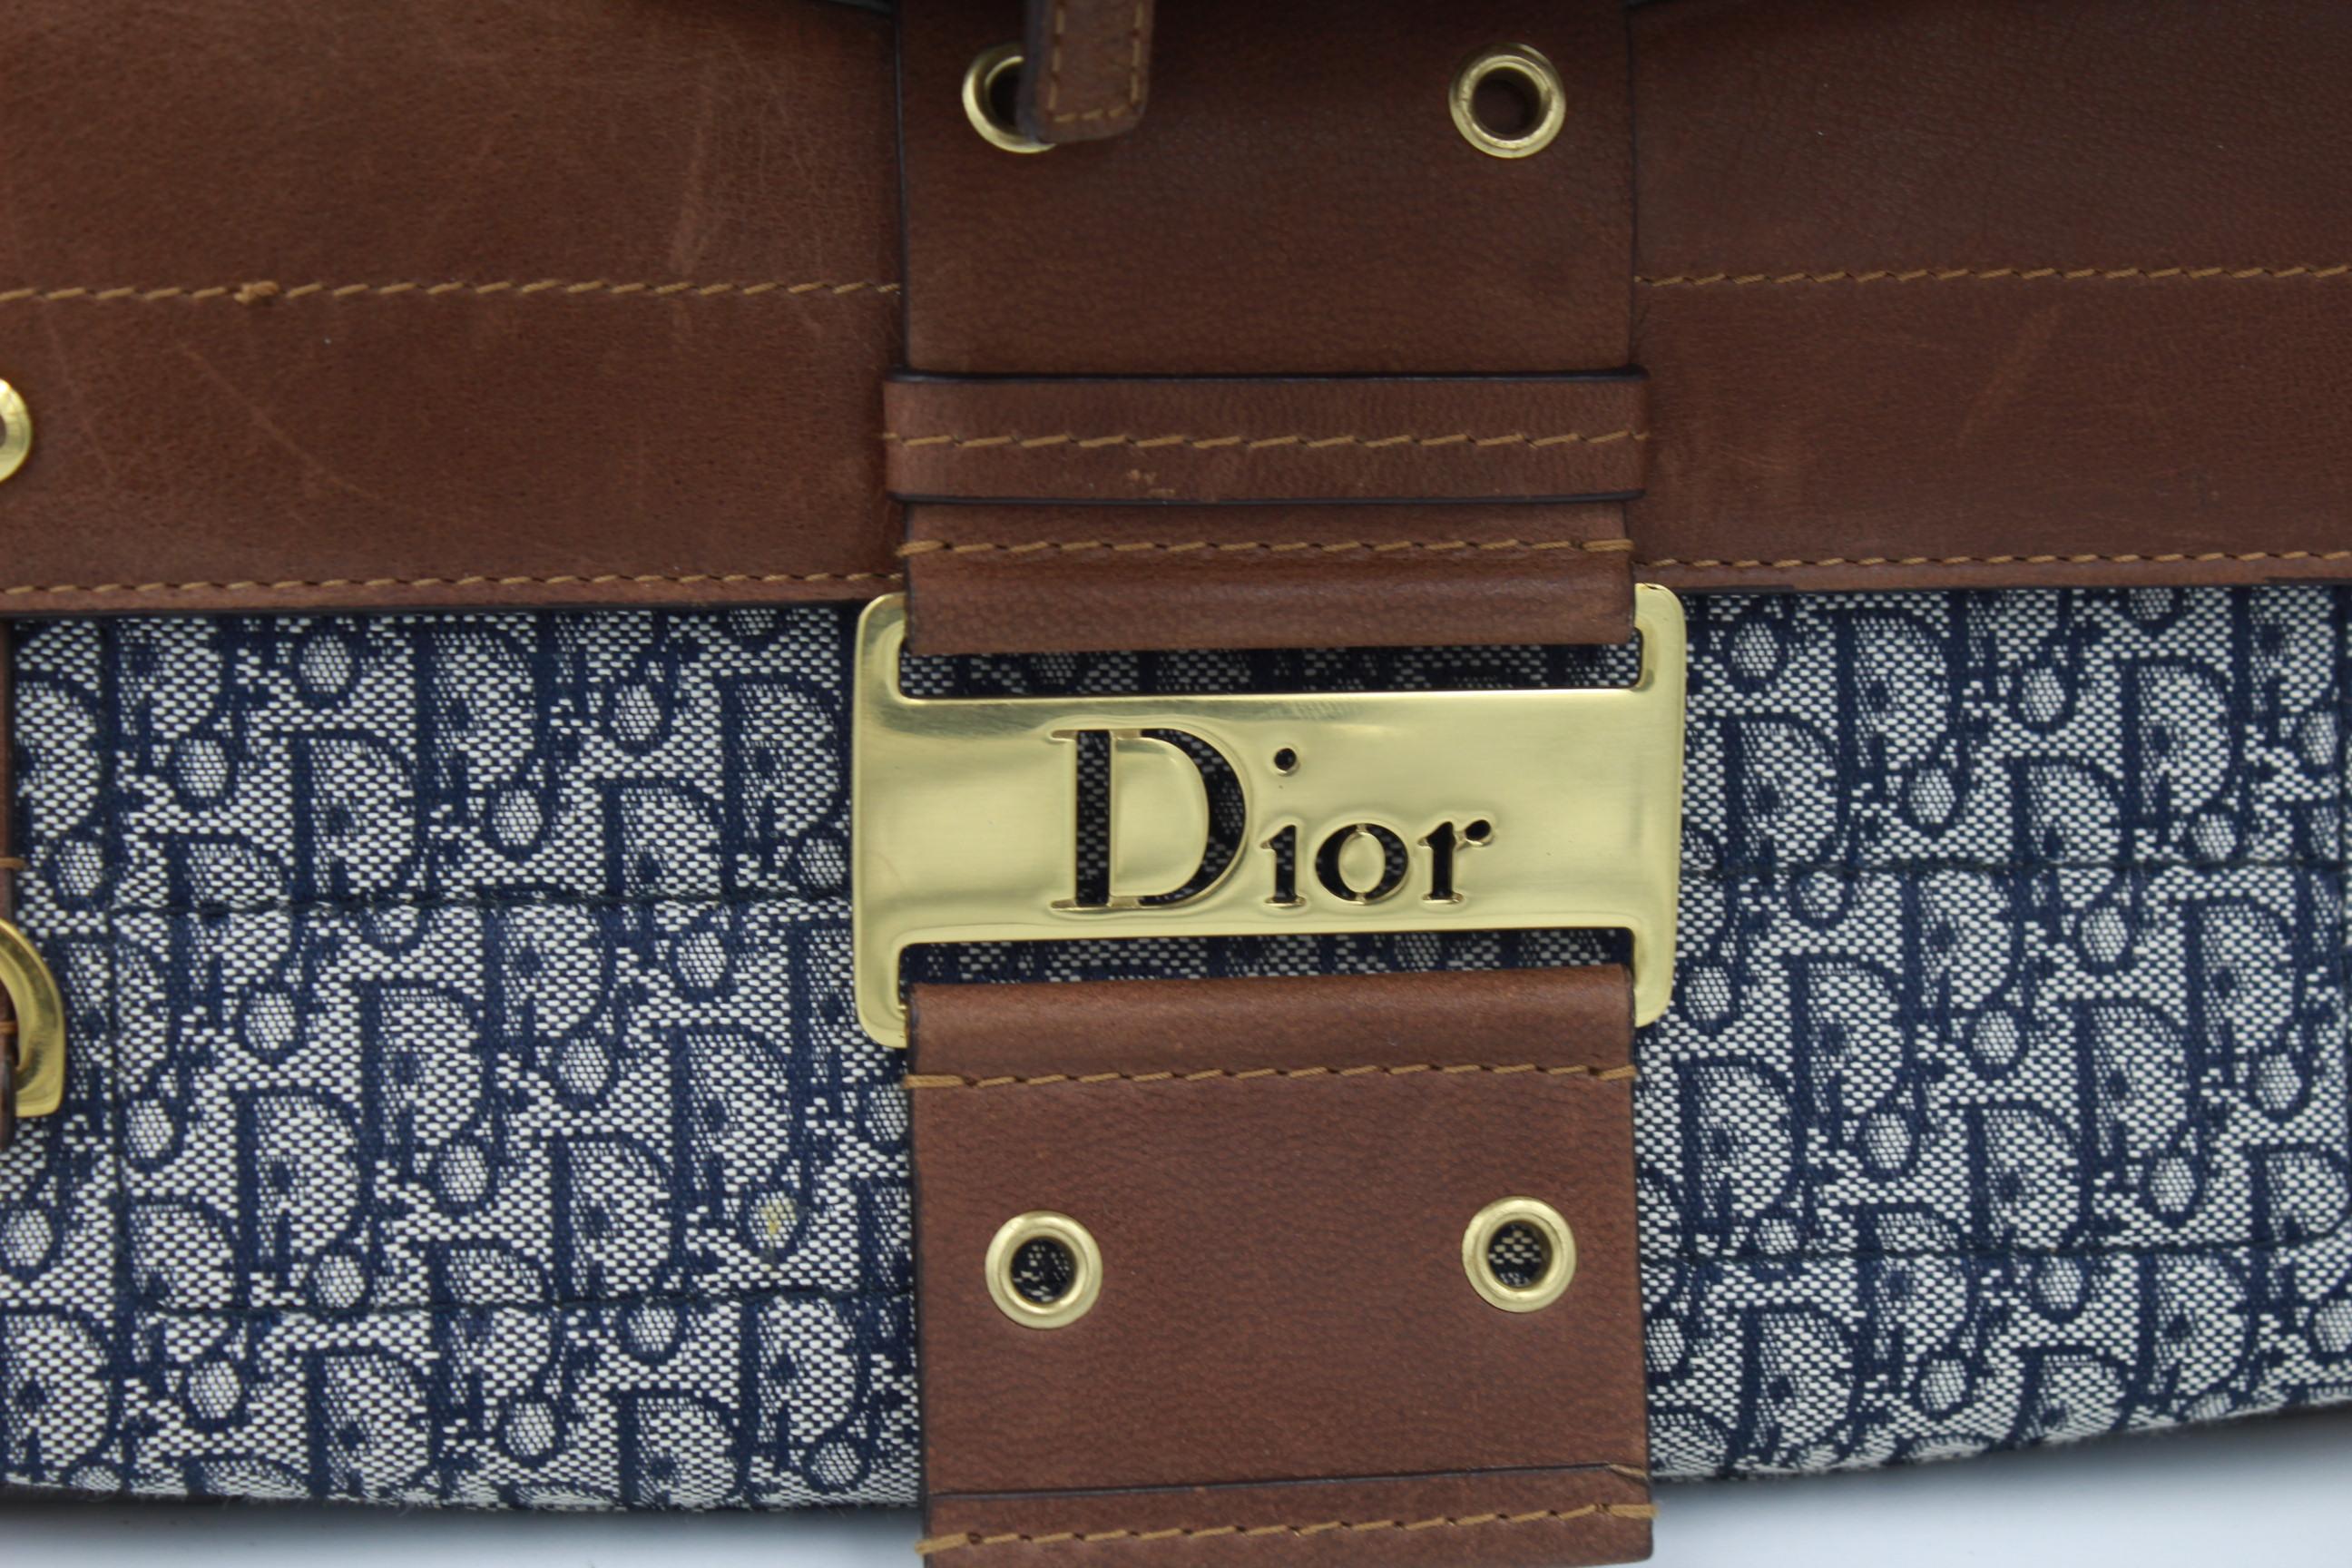 Super nice Christian Dior Street Chic  by Johan Galliano Handbag
Good condition but leather presents some patina na dlight scratches as its natural leather.
With detacheable small pouches
Size 30x15